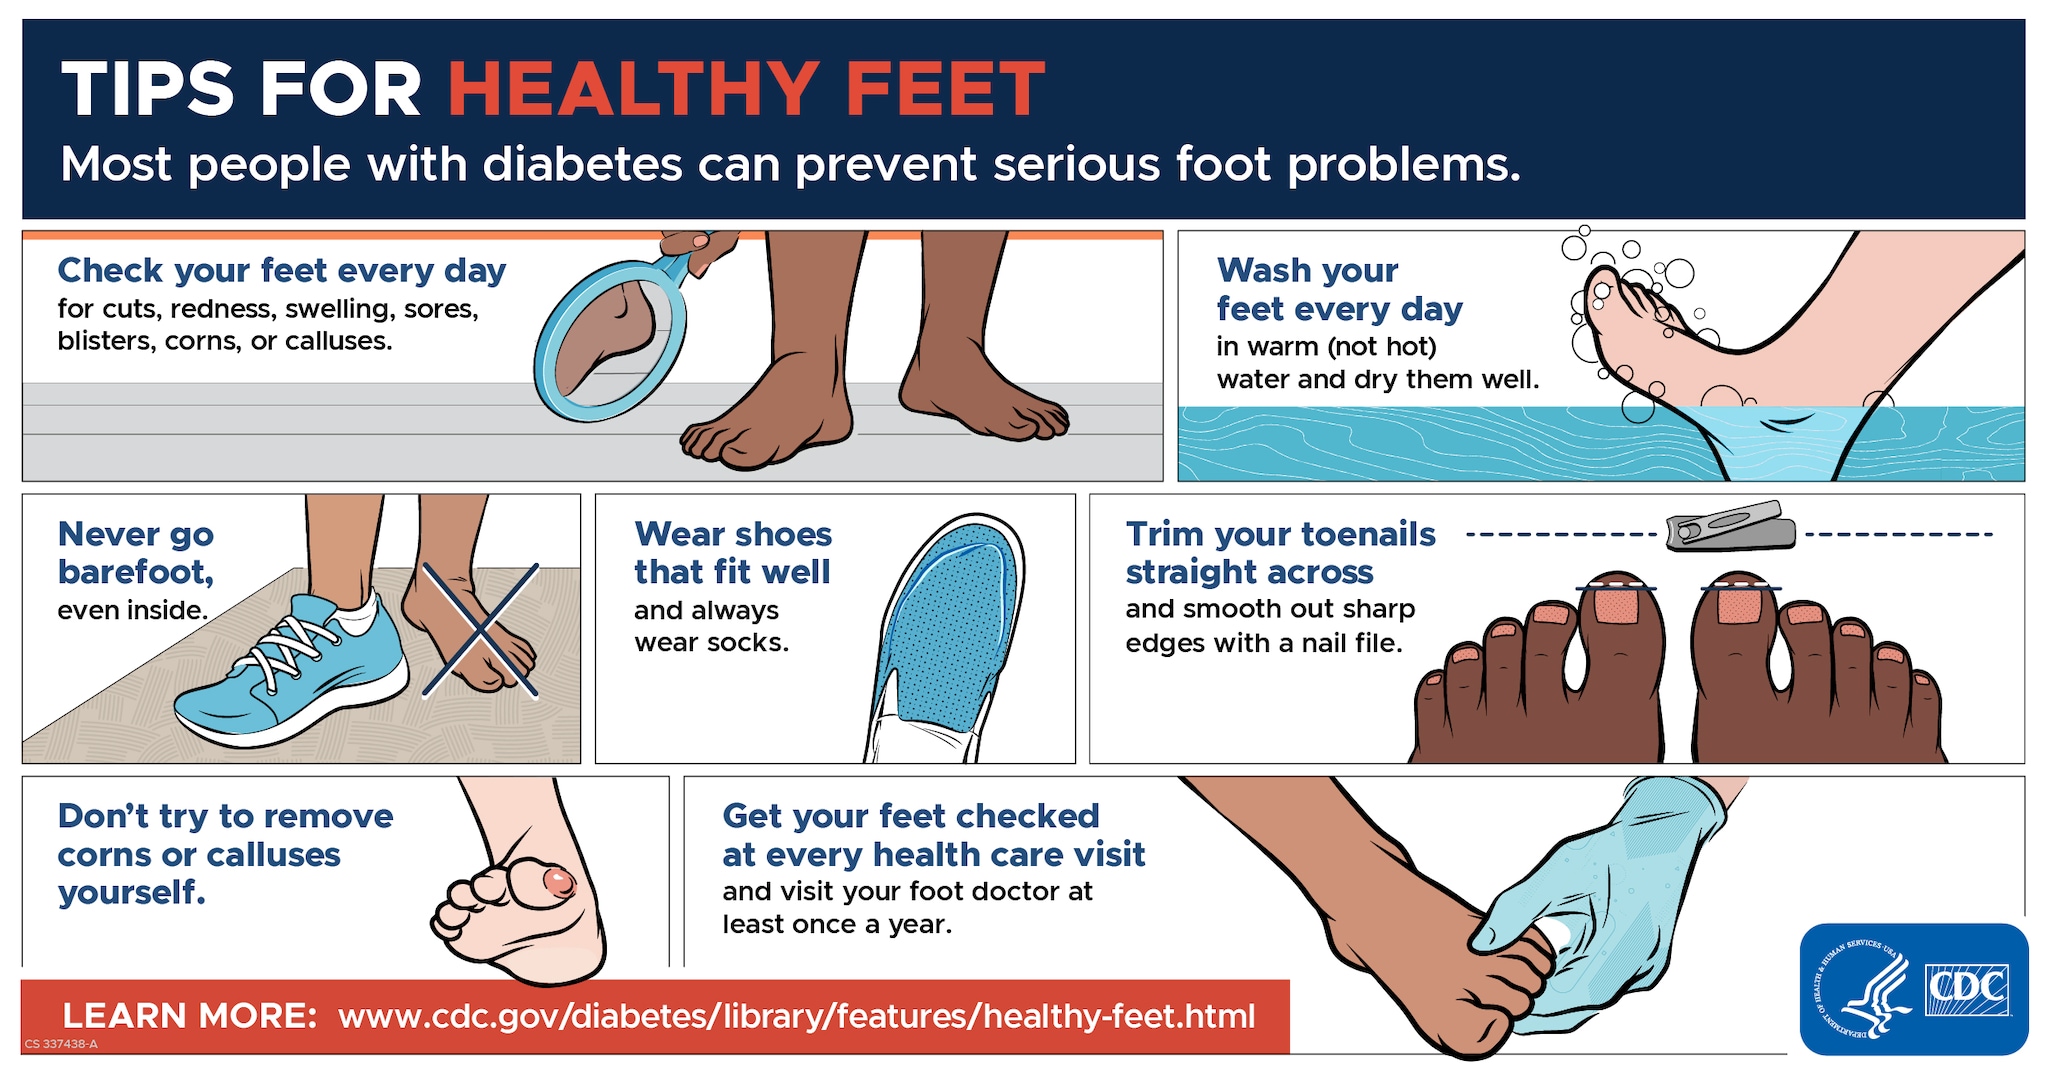 Preventing diabetes-related foot complications